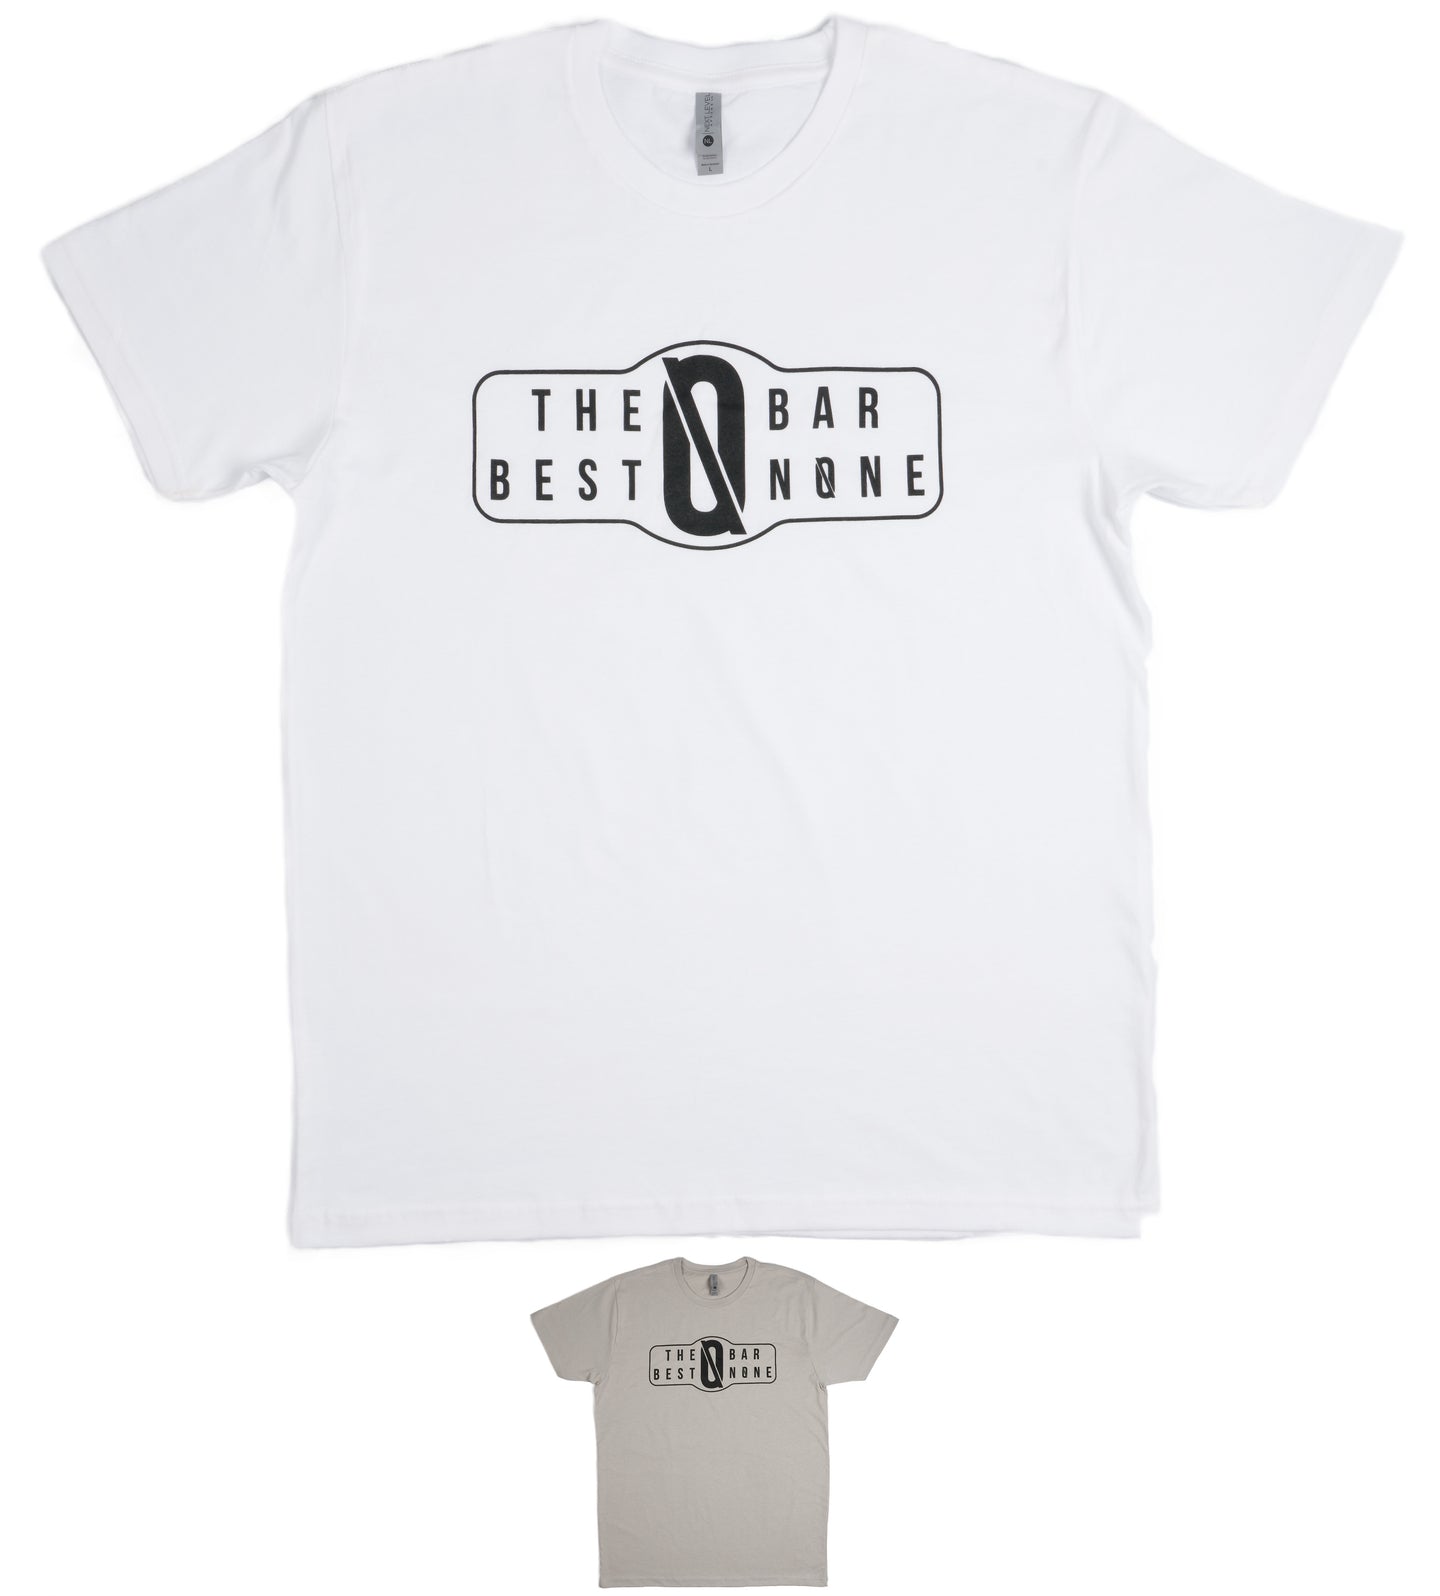 BAR N0NE T-Shirt | The Best BAR NONE, Motivate Inspire Win at Life Shield Graphic